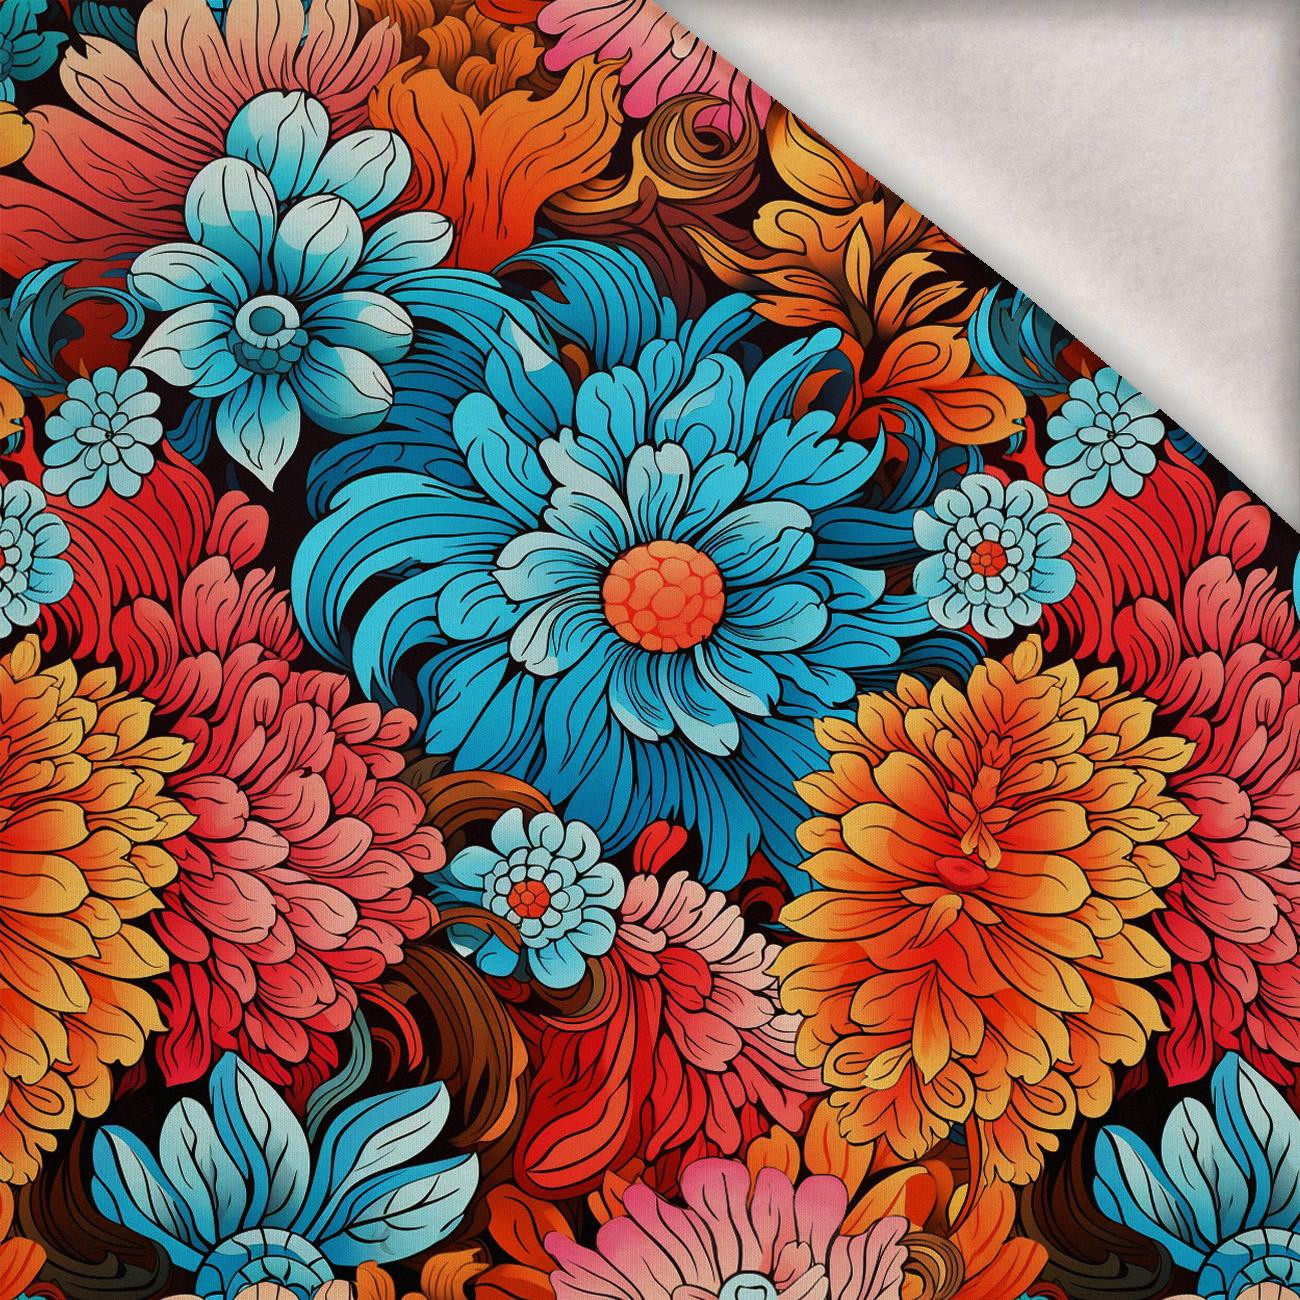 COLORFUL FLOWERS pat. 2 - brushed knitwear with elastane ITY